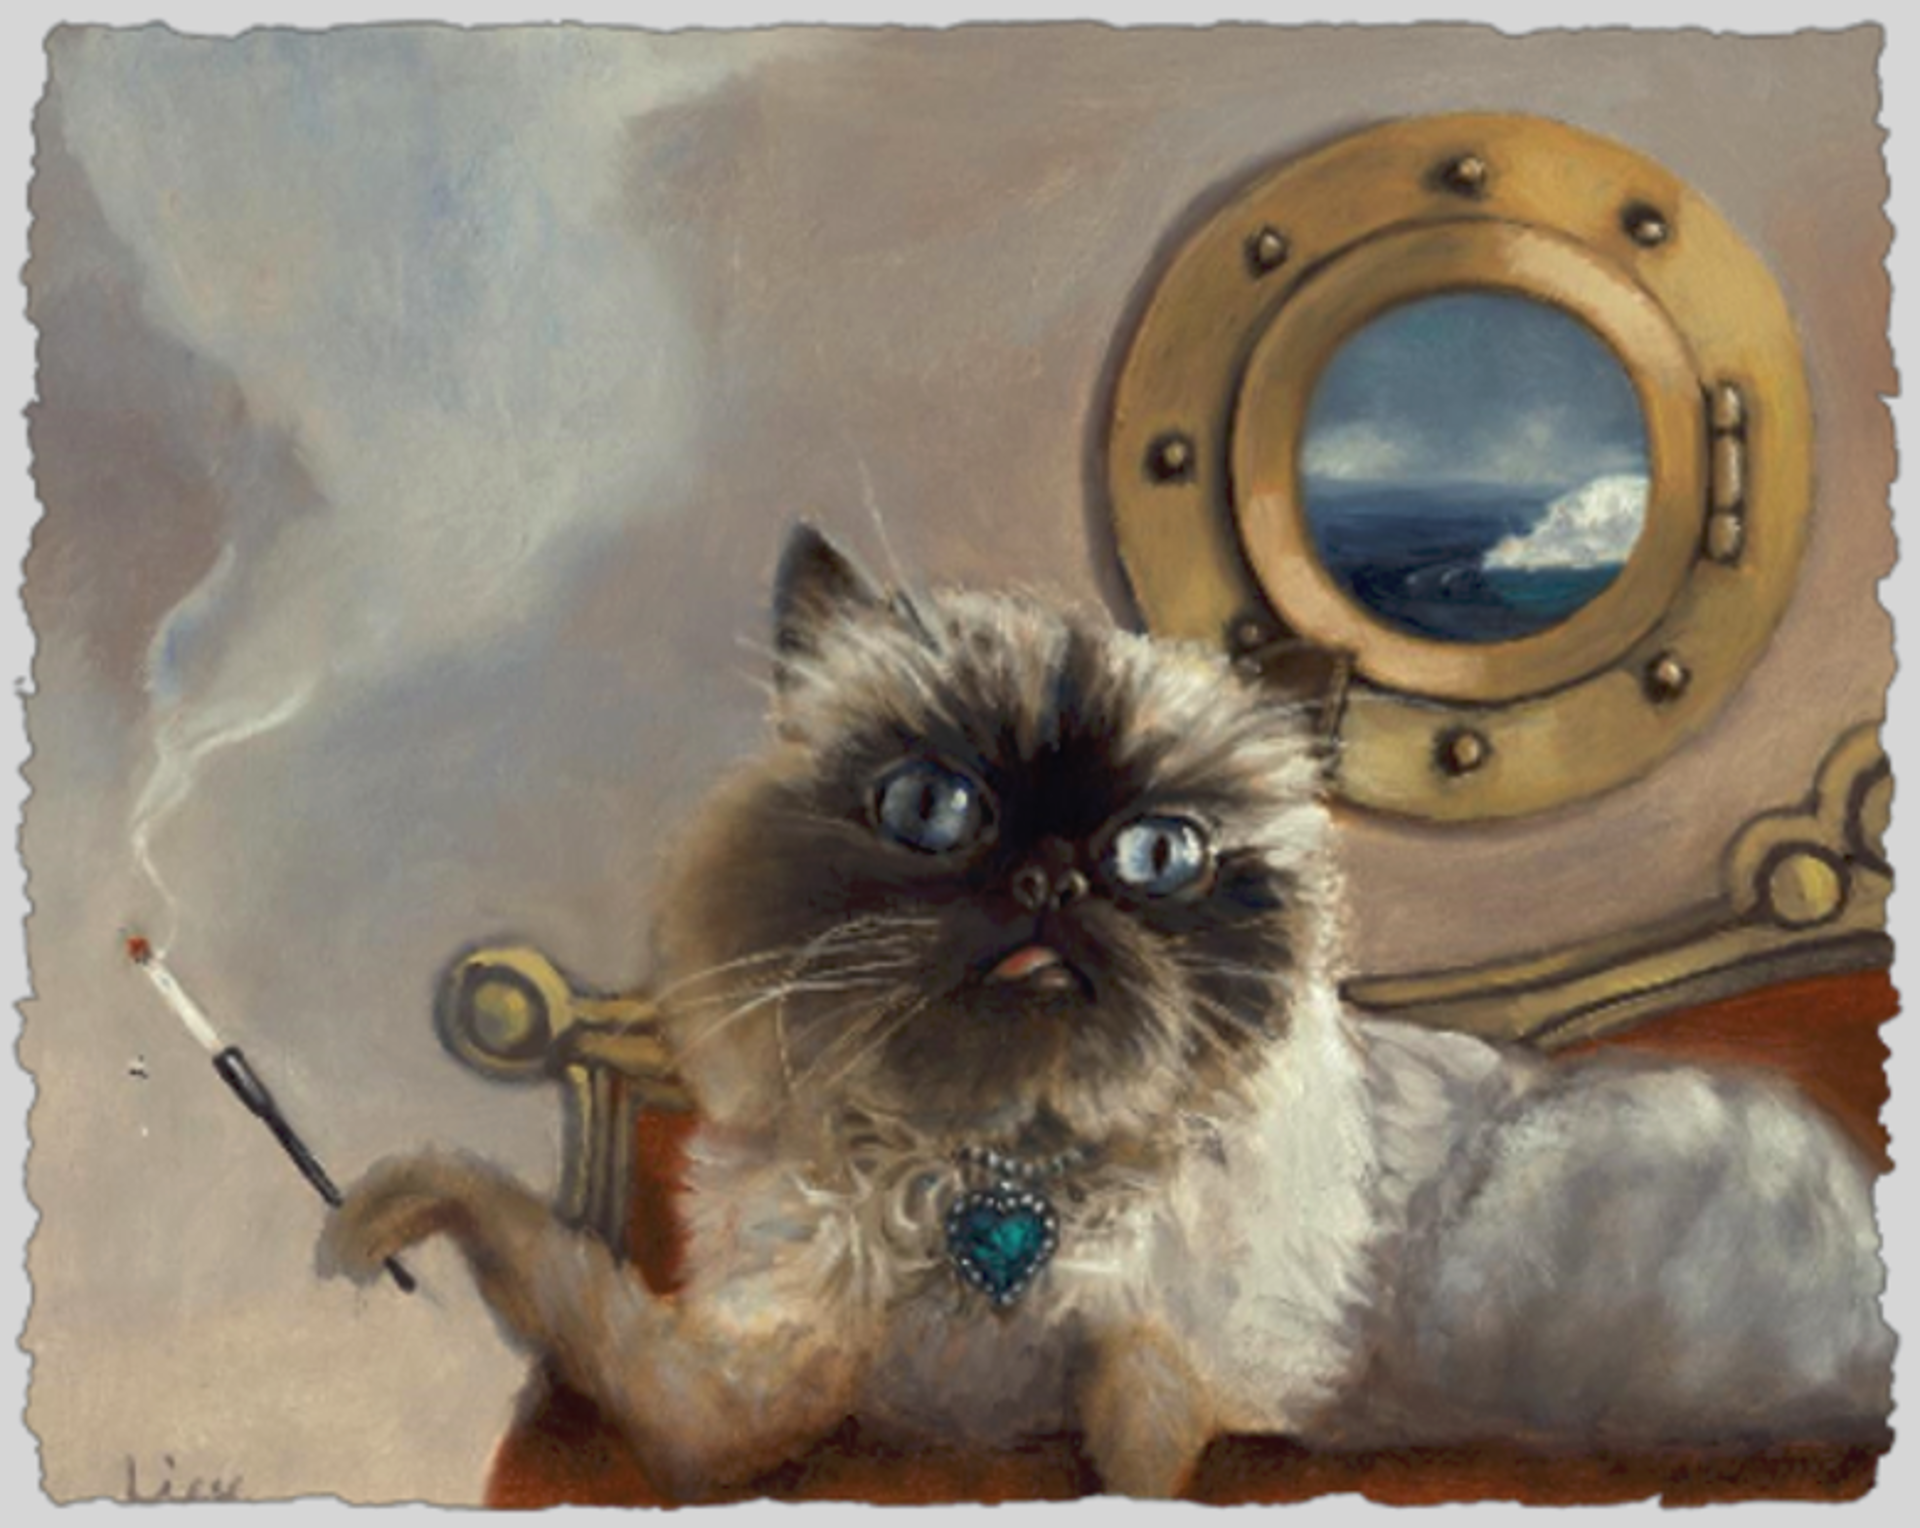 Lulu on the Titanic (Giclee on Deckled Paper) G.O. by Liese Chavez